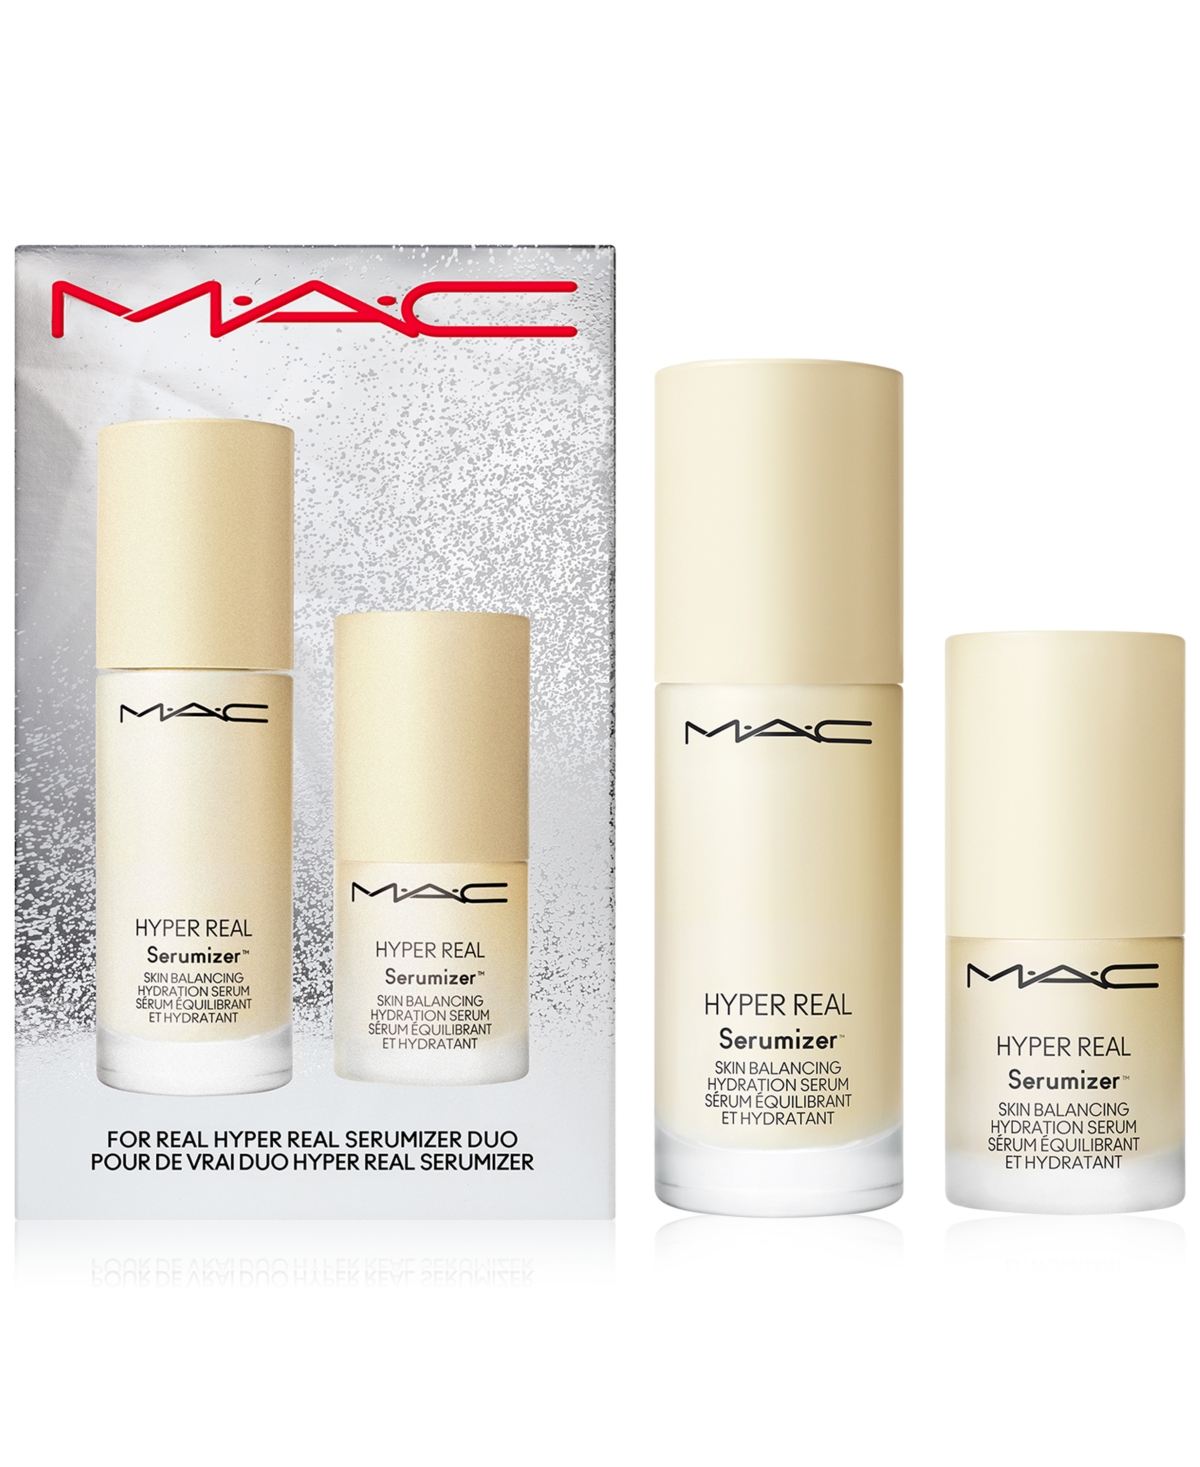 Mac 2-pc. For Real Hyper Real Serumizer Set In No Color